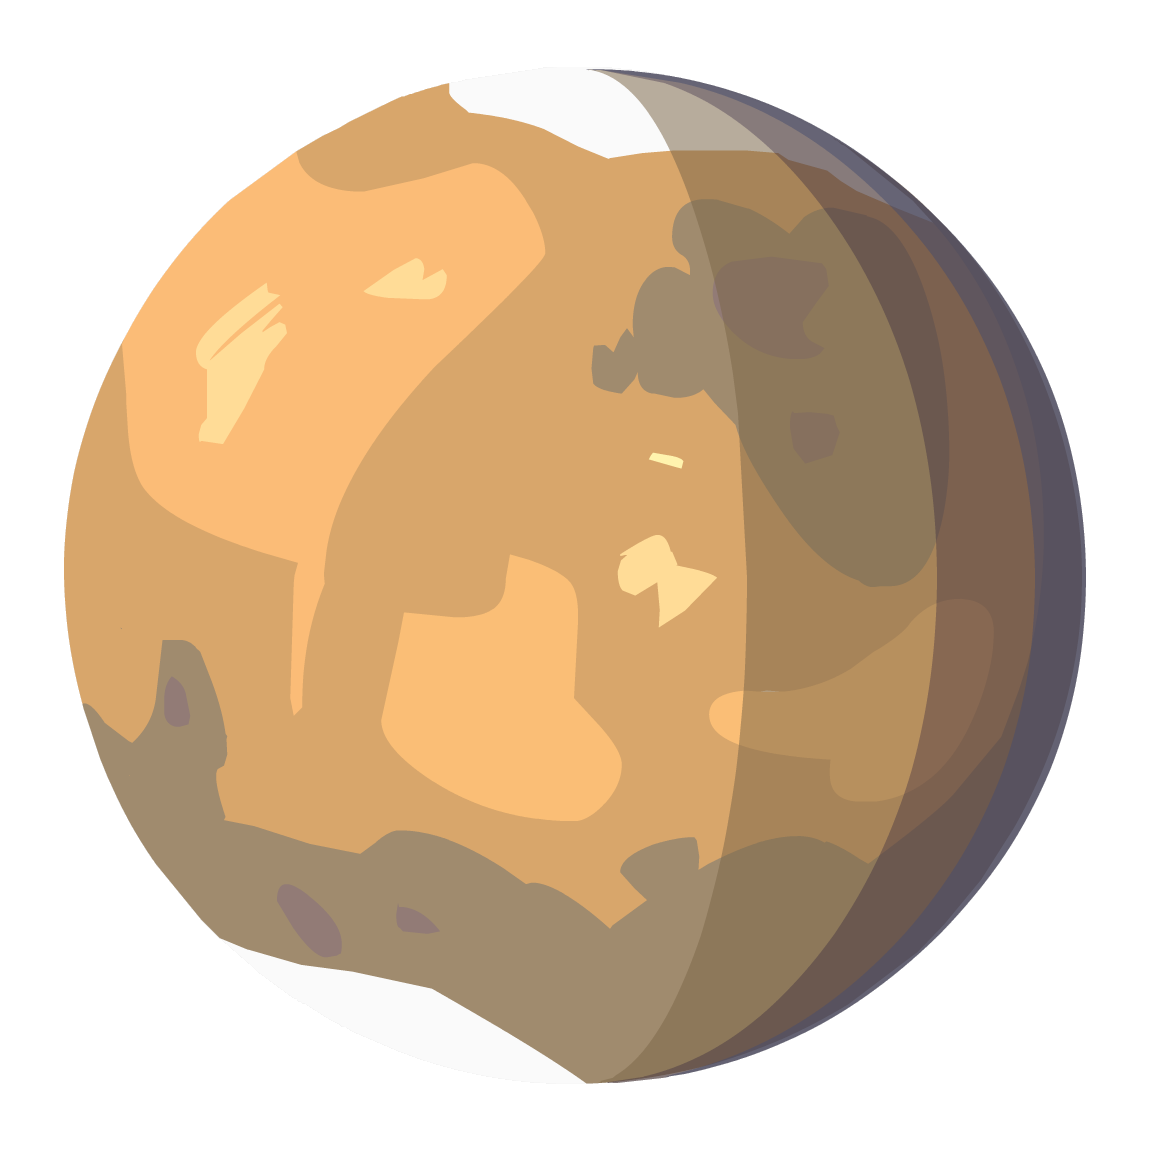 Mars Planet PNG HD Images